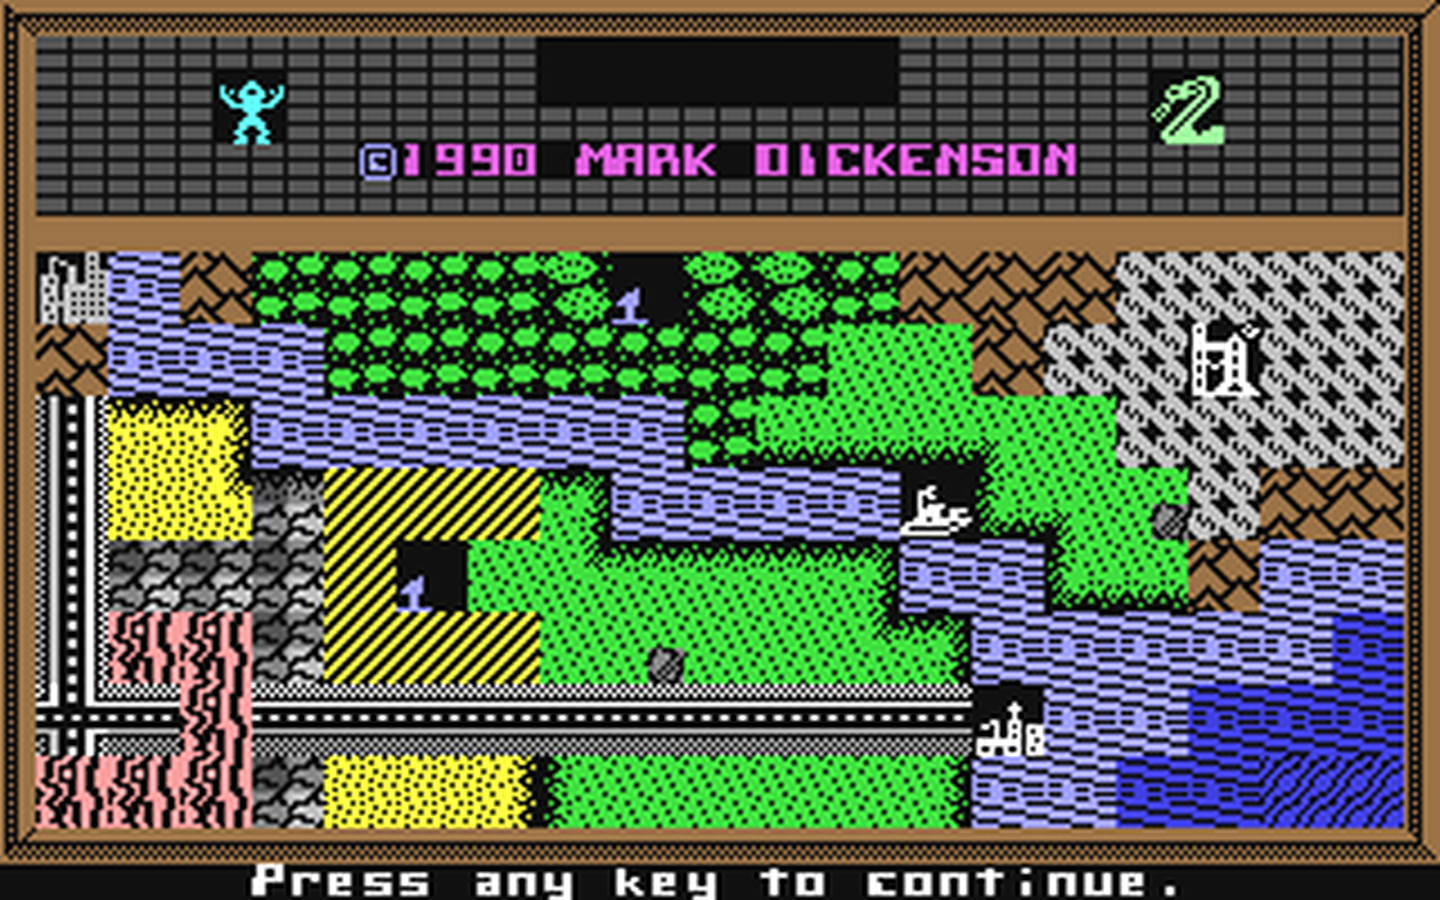 C64 GameBase Aftermath!_-_The_System_Wars..._[Preview] (Preview) 1990